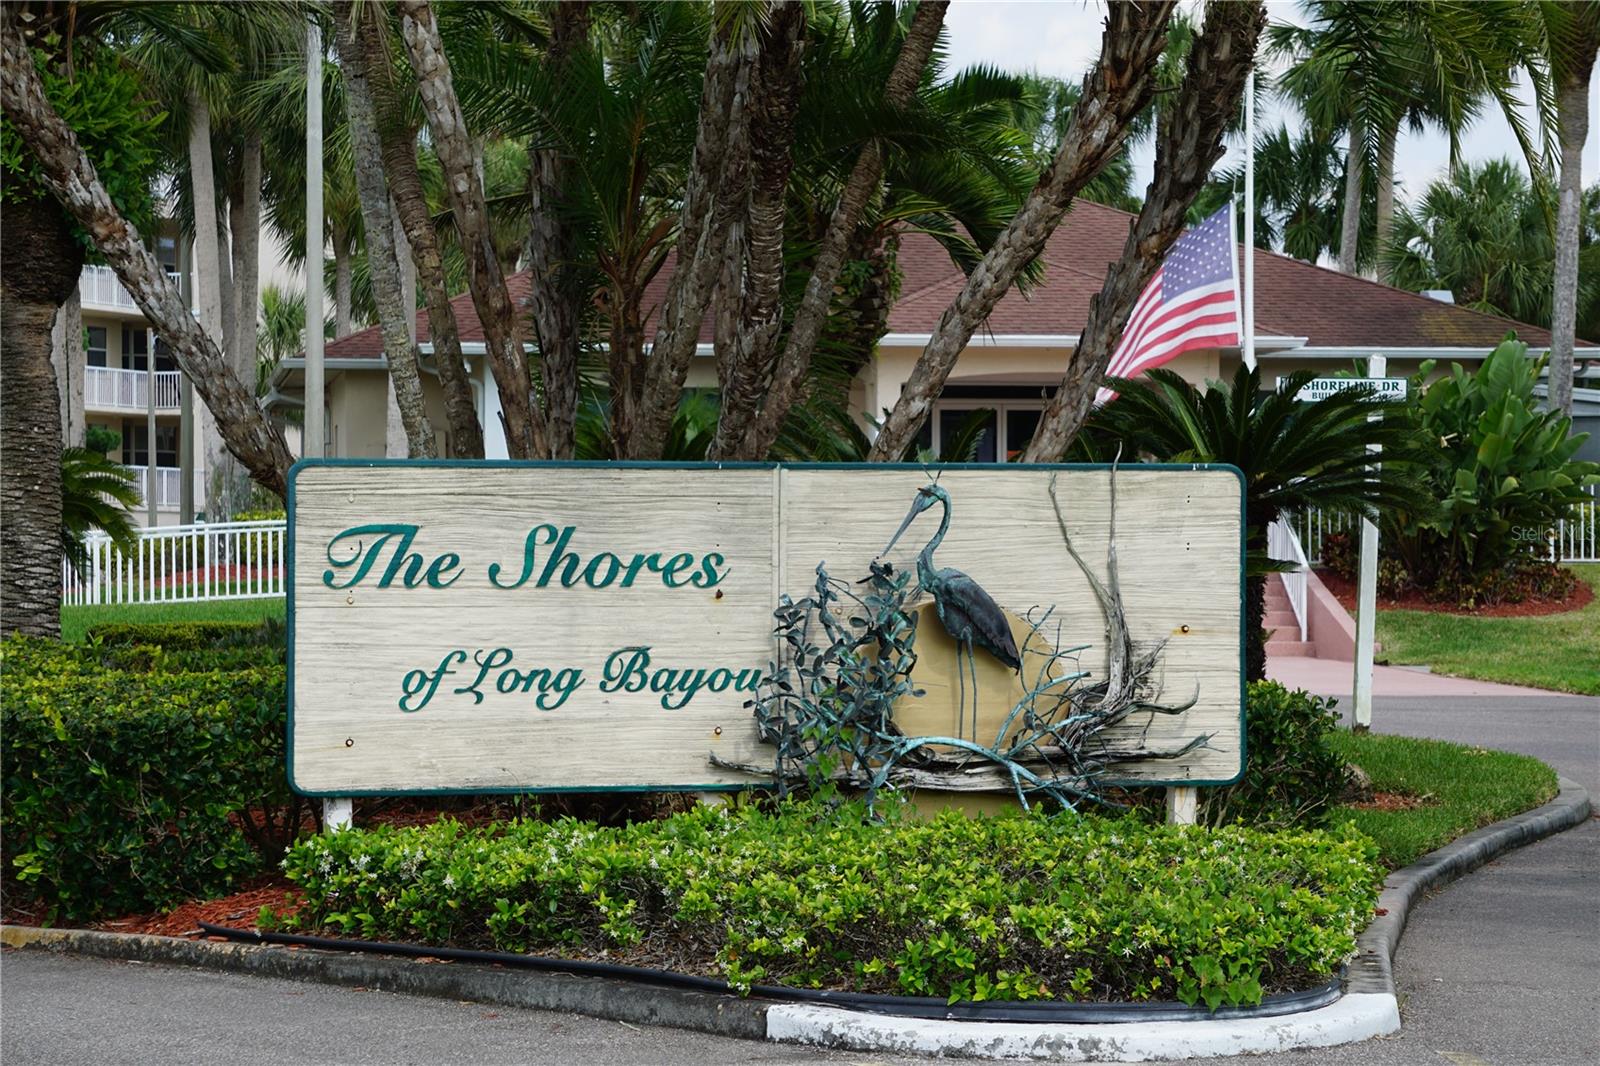 The Shores of Long Bayou is known for its magnificent water views and secluded and quiet living even in the heart of Seminole!